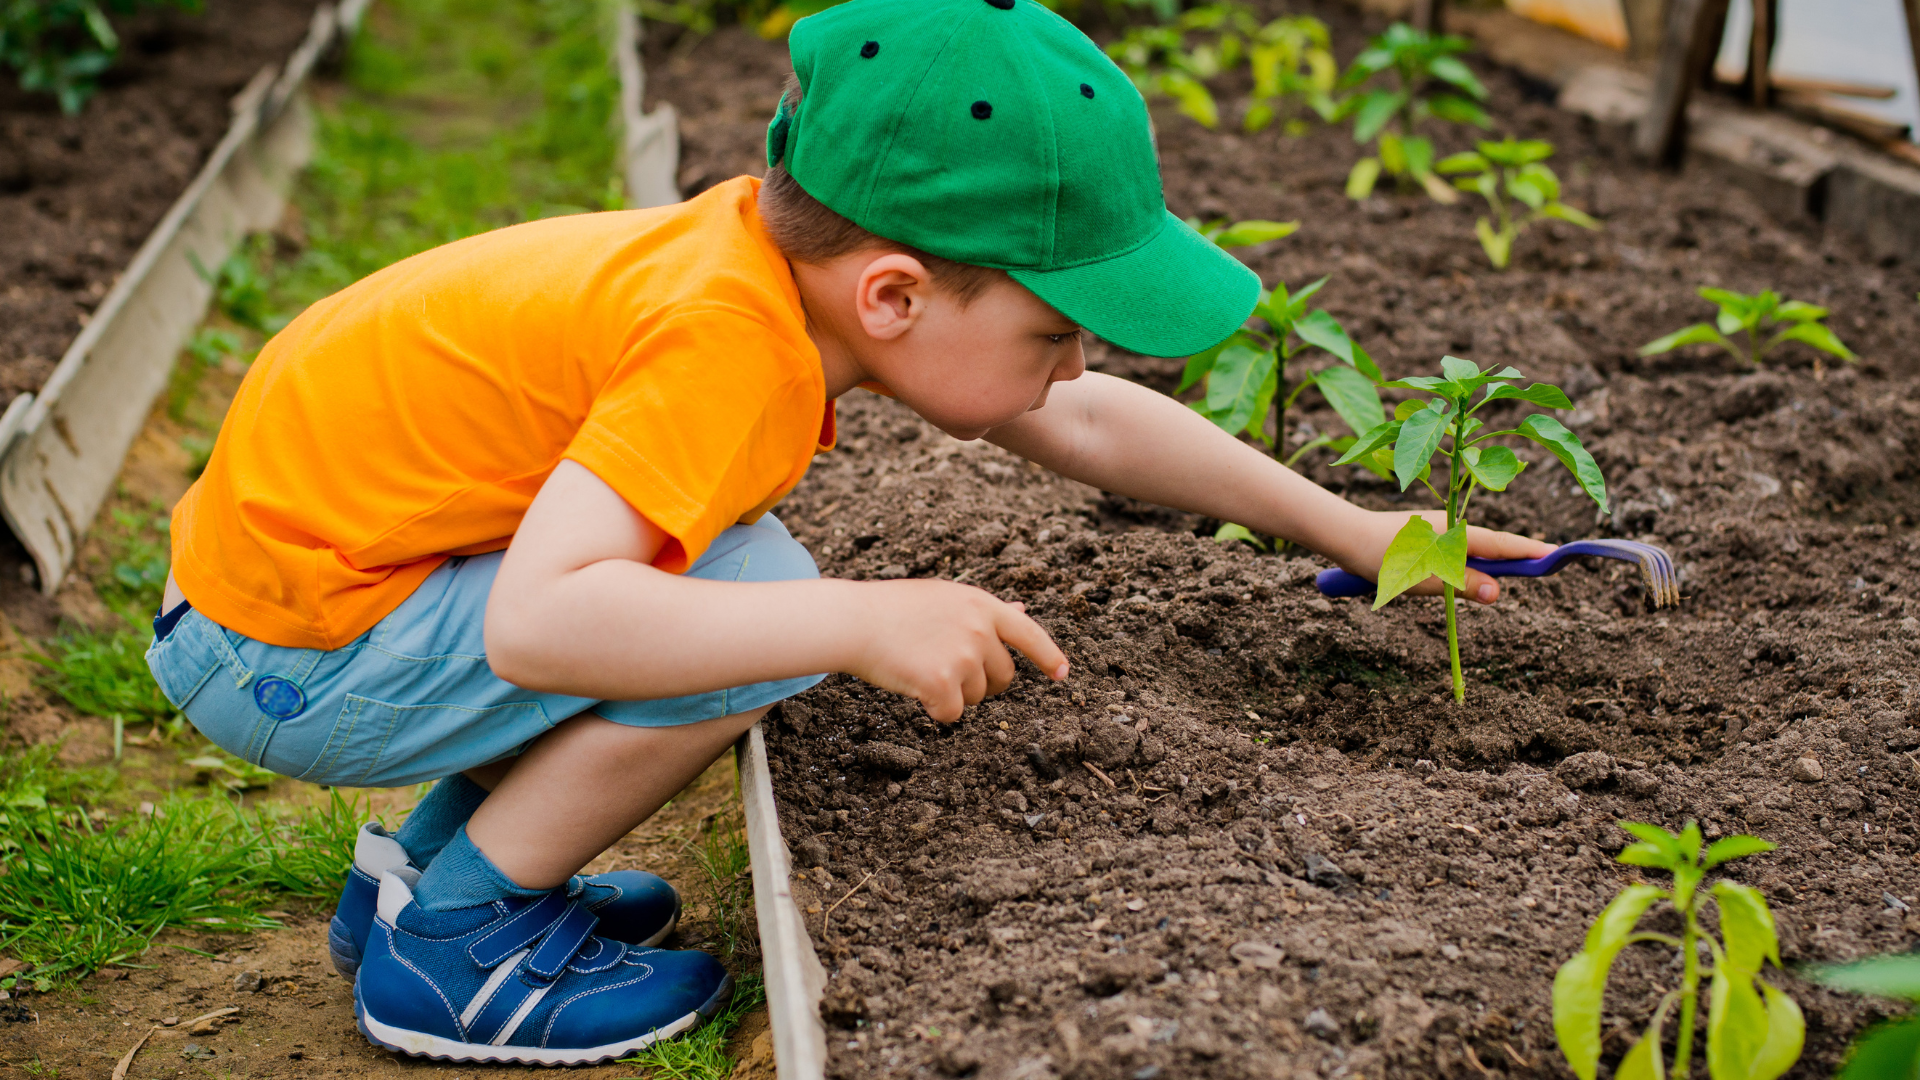 A young boy digging in an allotment